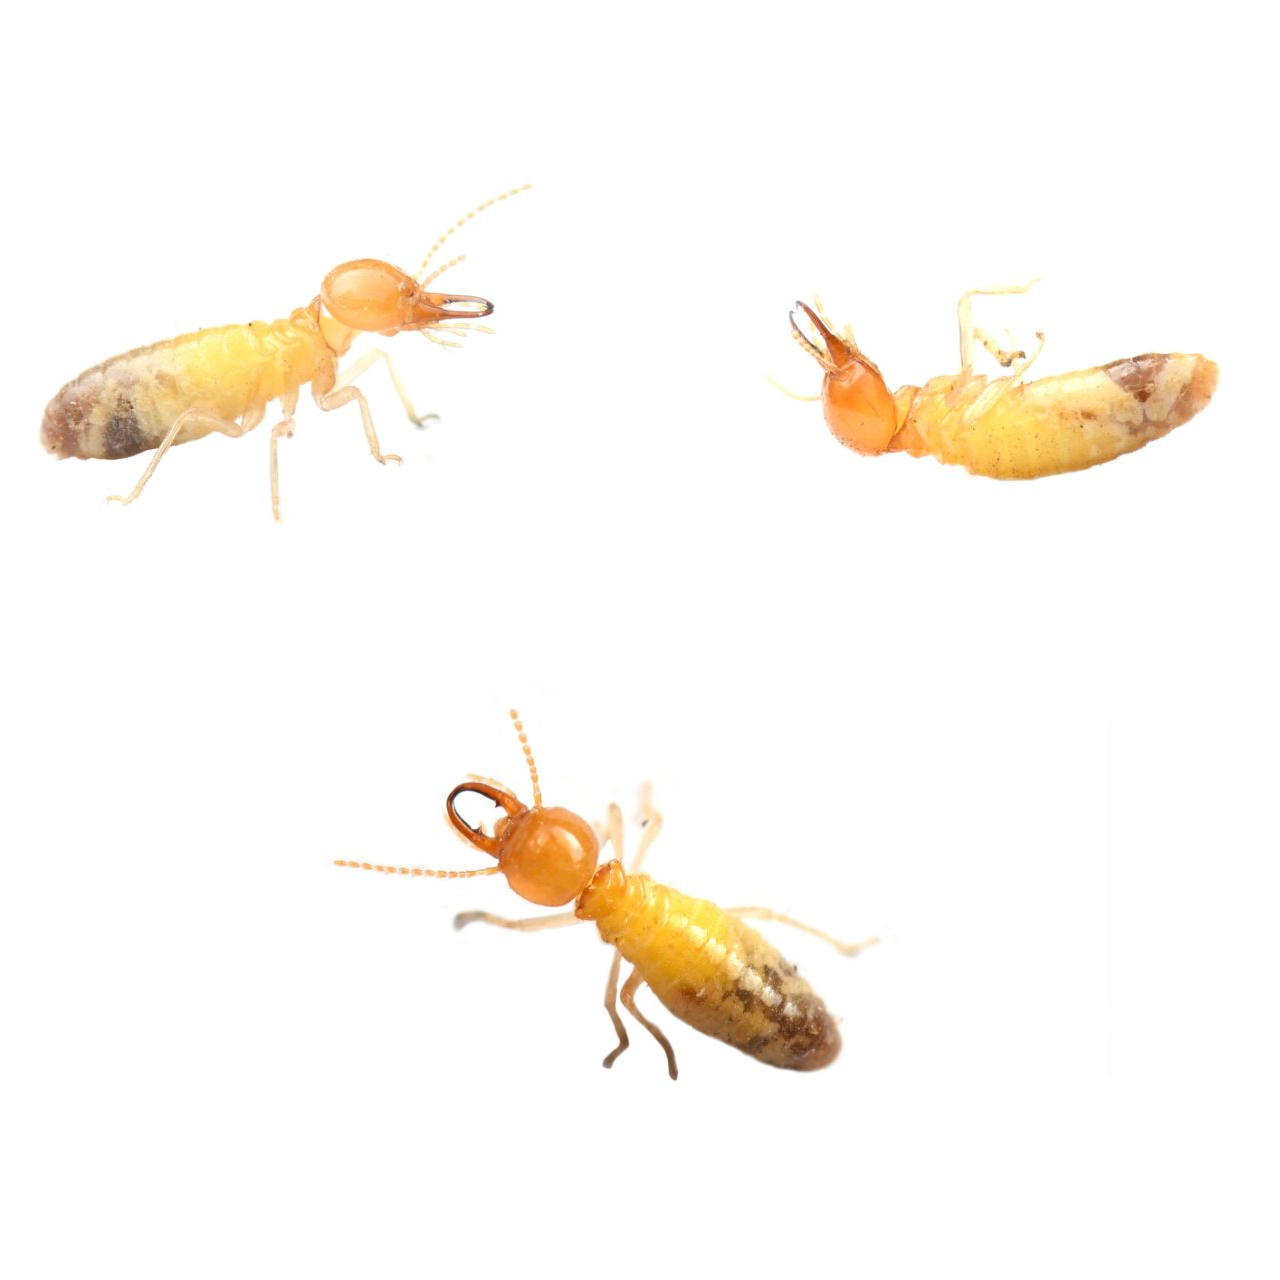 Bug Removal — Dead Cockroach in Tampa, FL